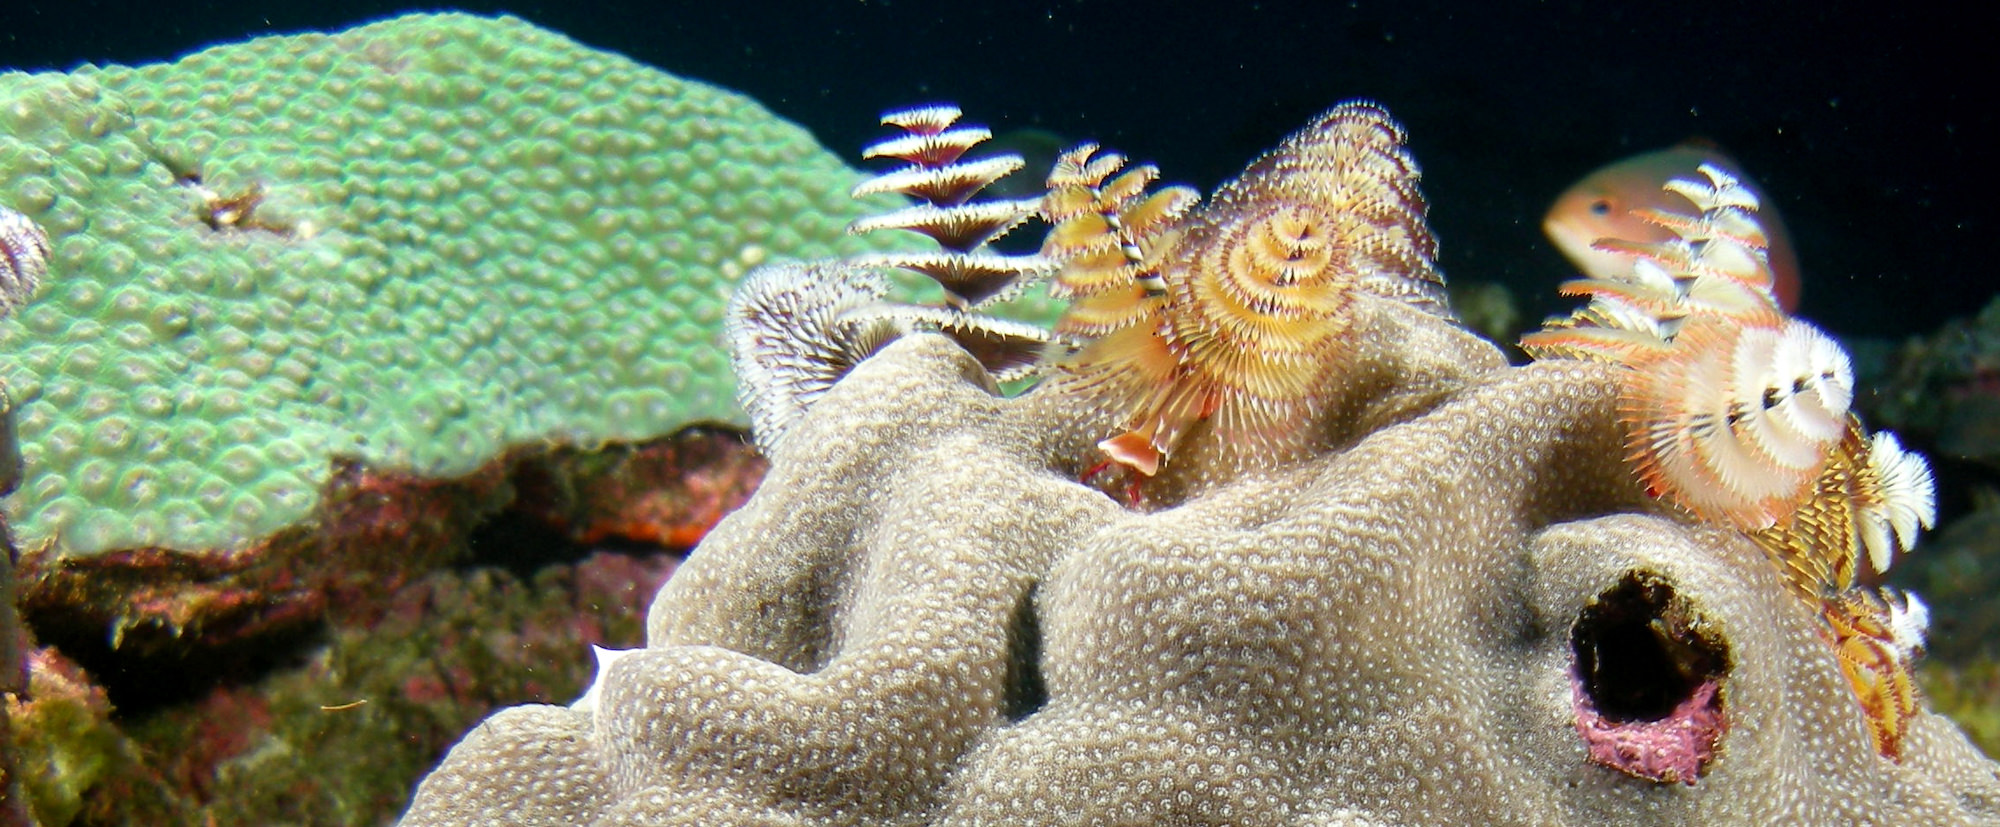 Christmas Tree Worms in Flower Garden Banks National Marine Sanctuary